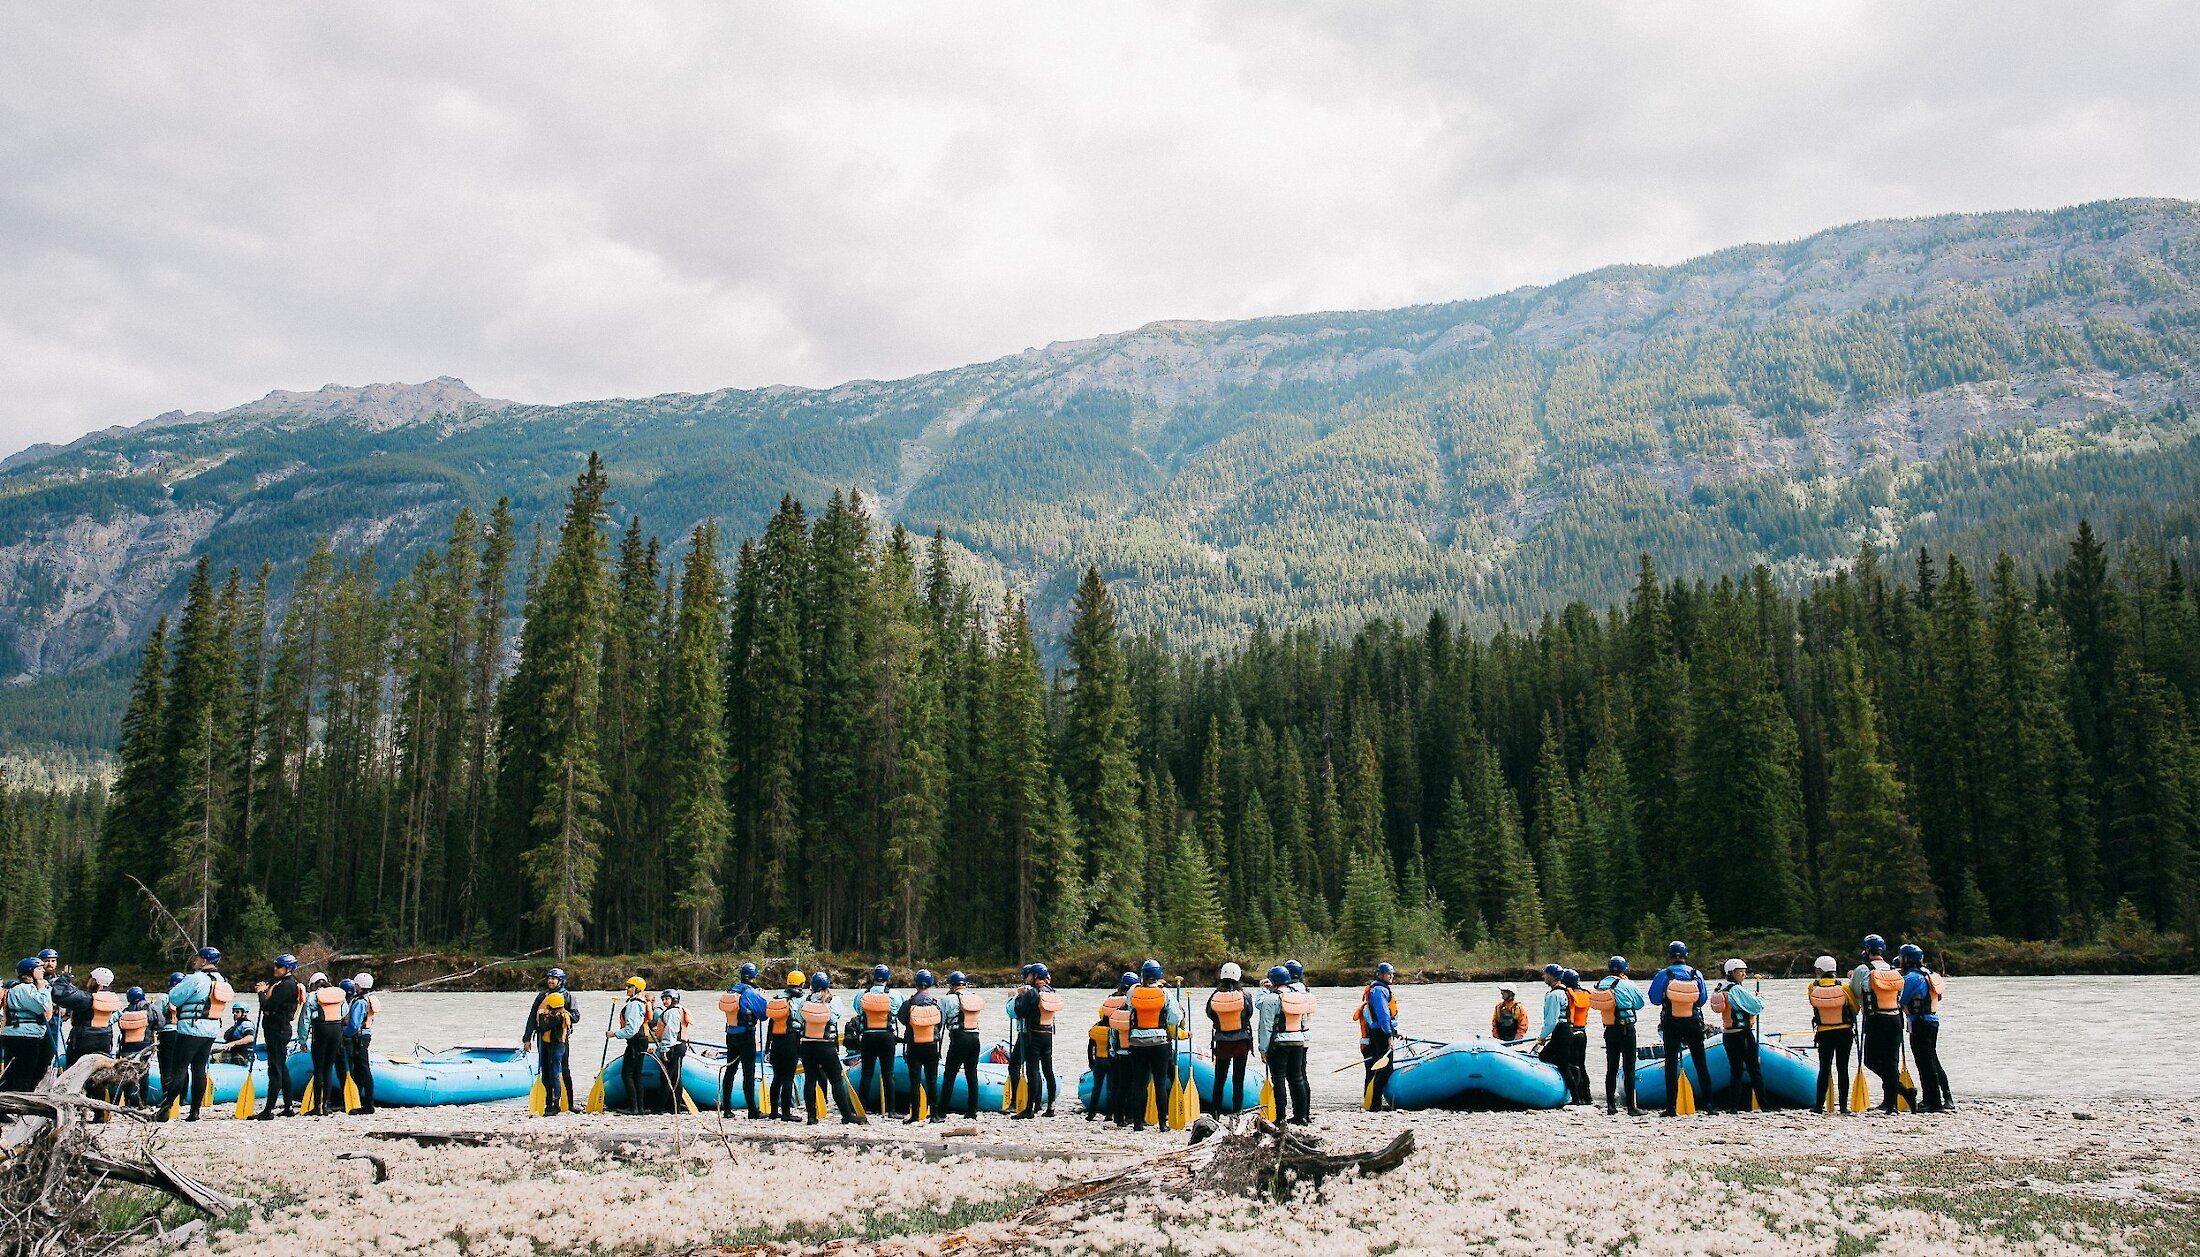 Rafters lining up ready to hit the rapids on the Kicking Horse River